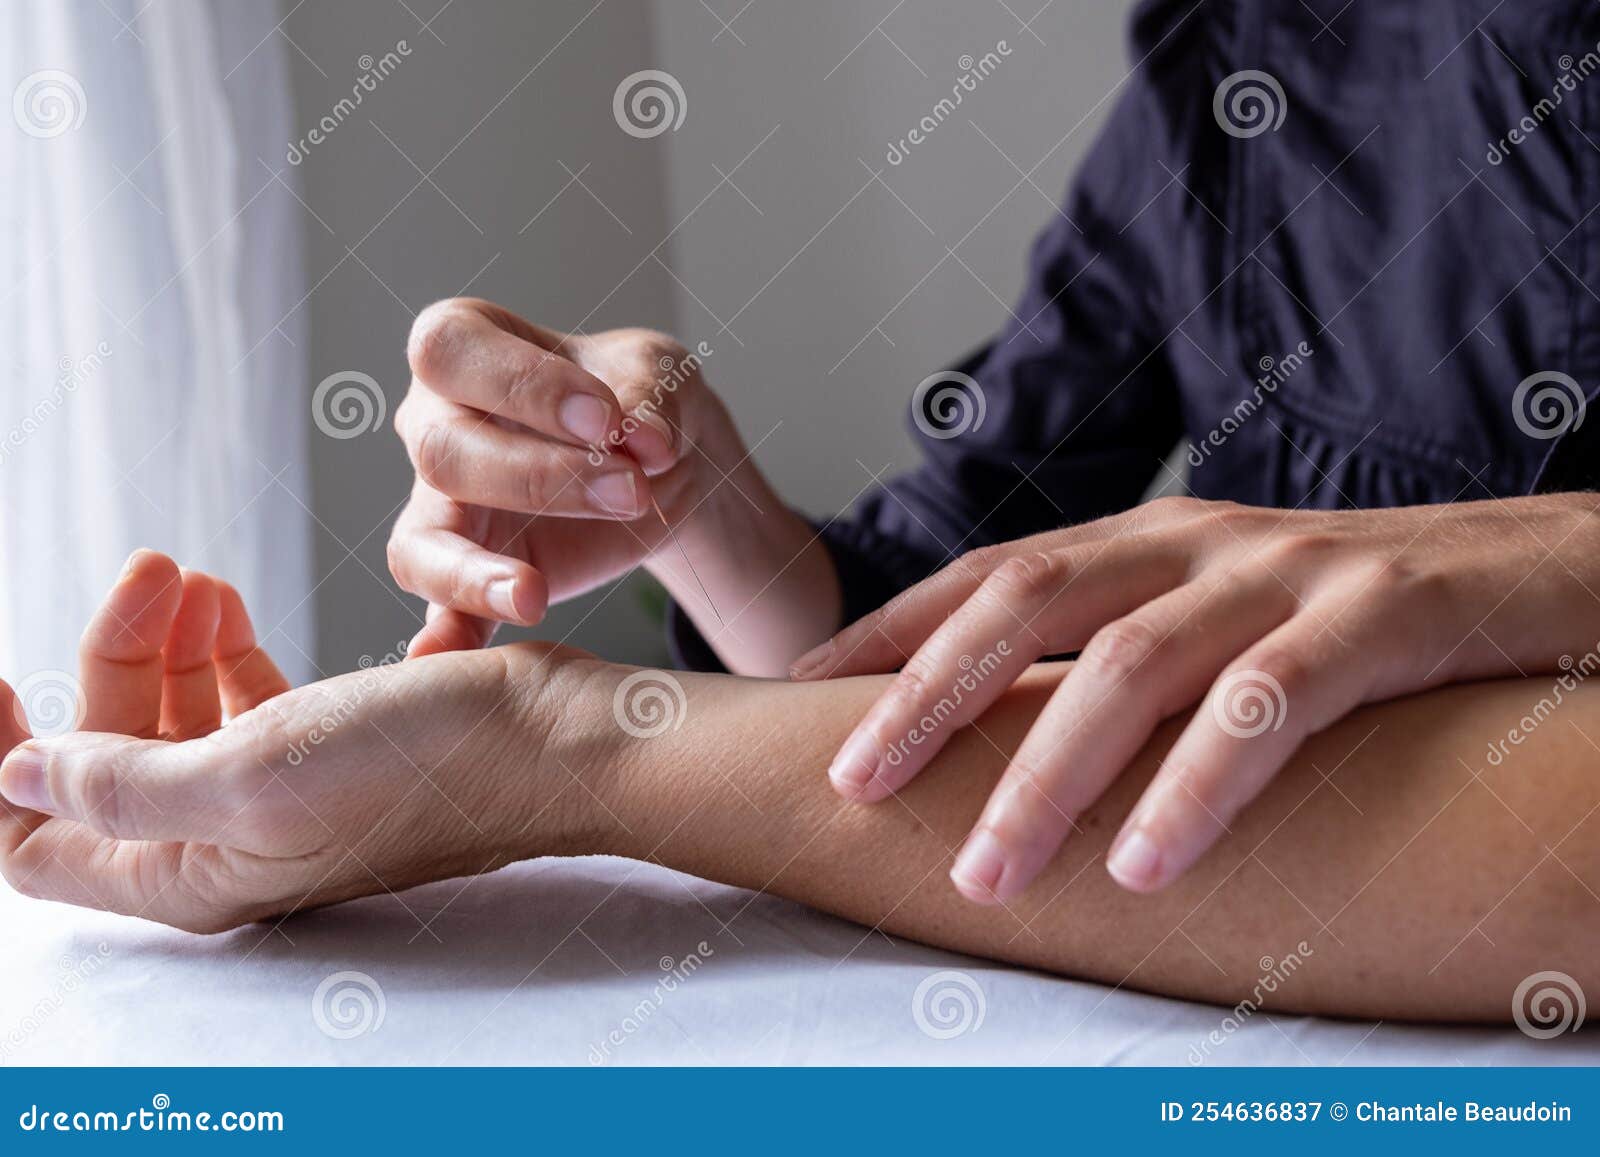 profesional woman giving acupuncture treatment